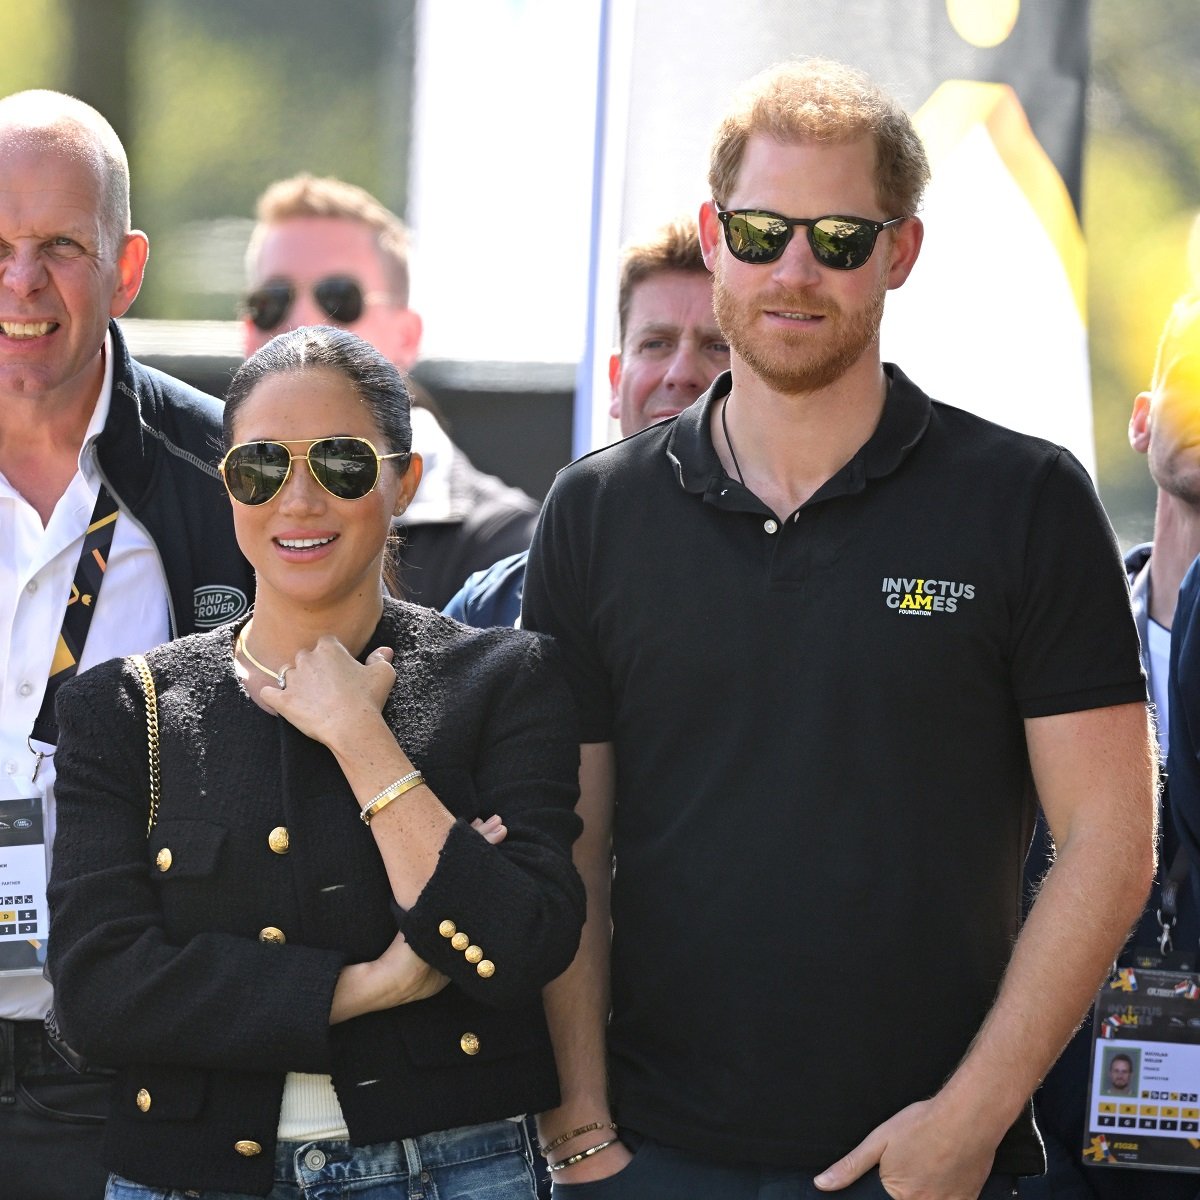 Prince Harry and Meghan Markle, who are reportedly starting to produce Netflix content, standing side-by-side during an Invictus Games event